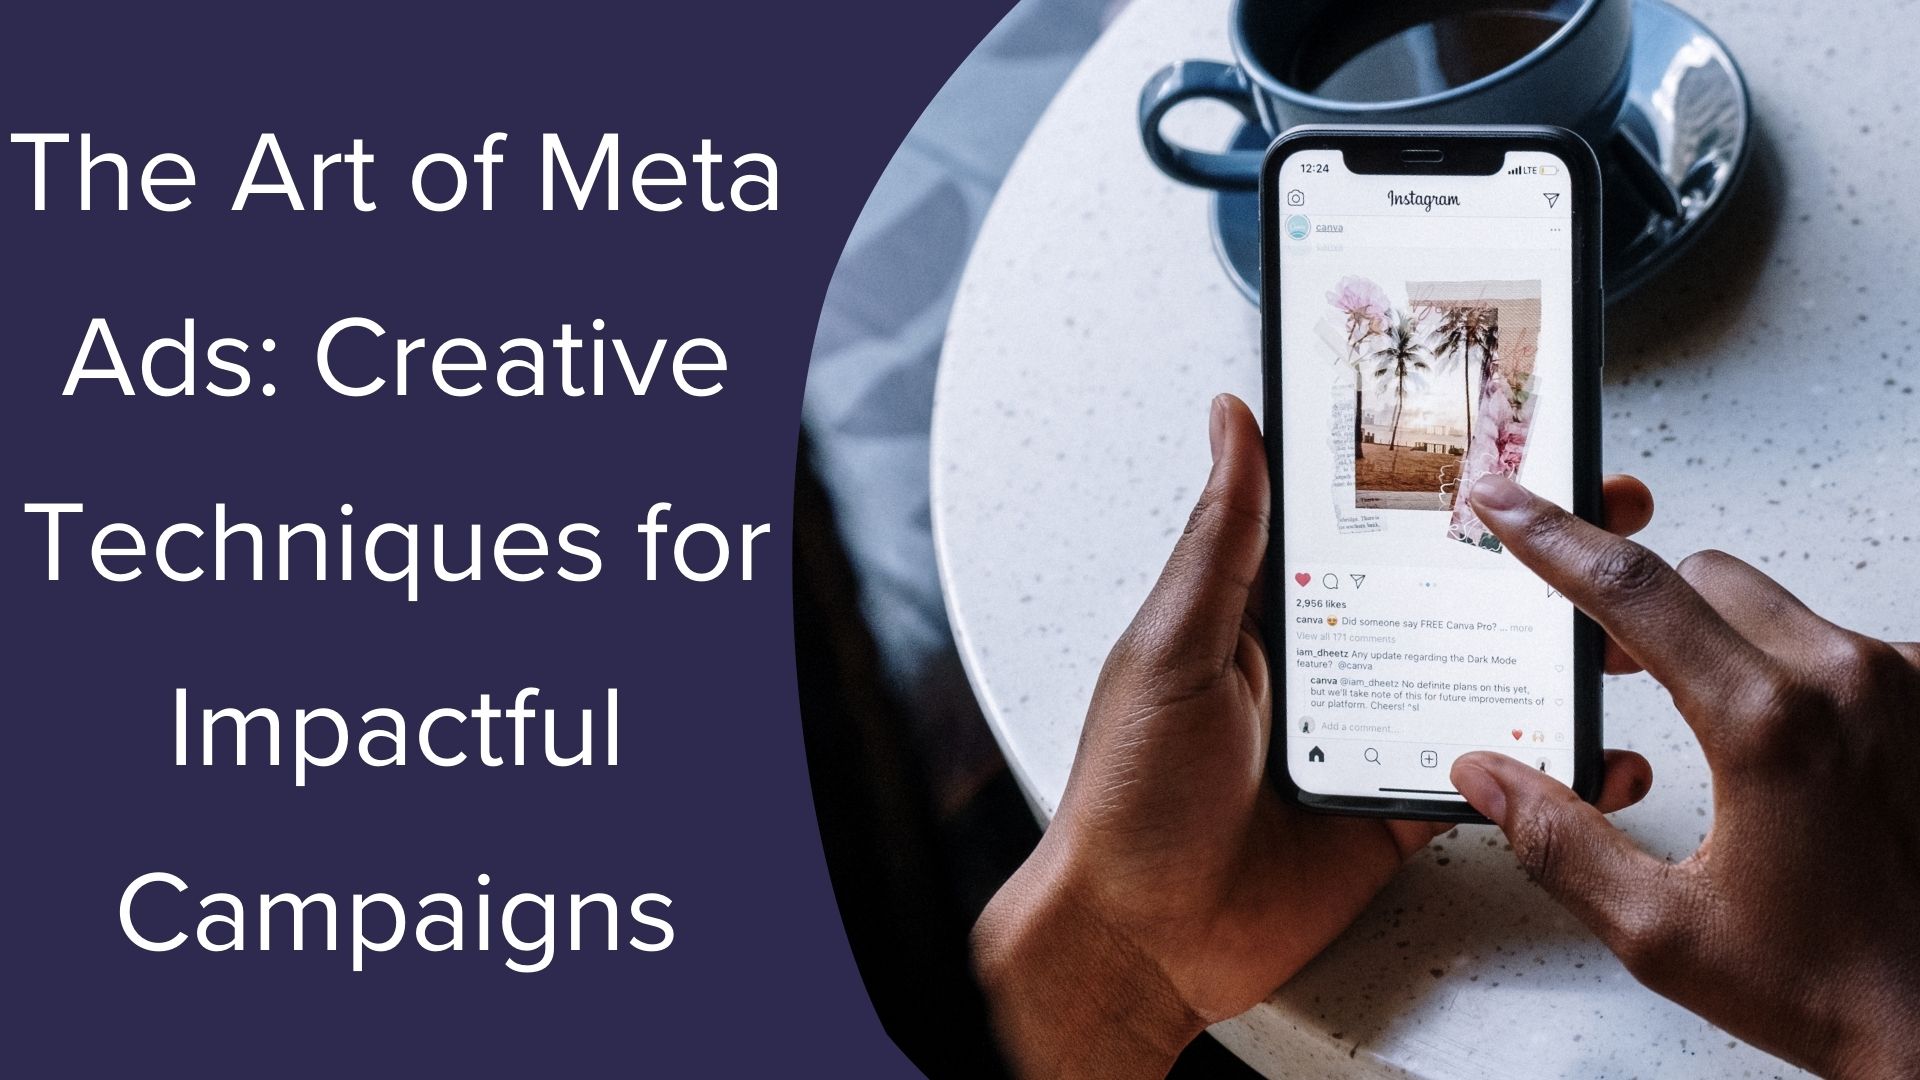 The Art of Meta Ads: Creative Techniques for Impactful Campaigns